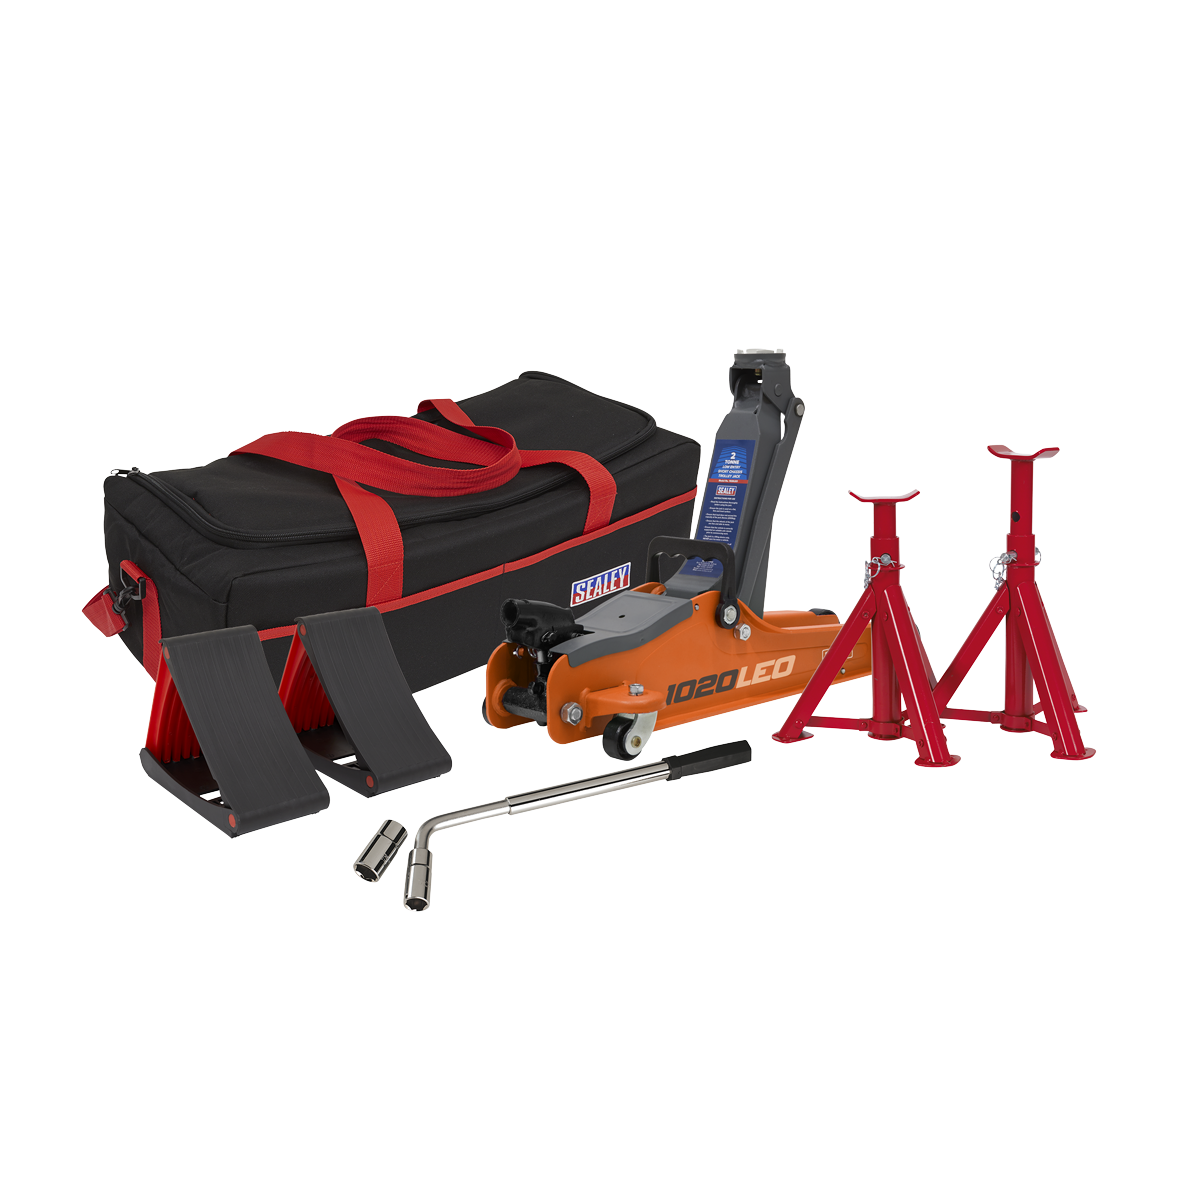 Trolley Jack 2 Tonne Low Entry Short Chassis & Accessories Bag Combo - Orange